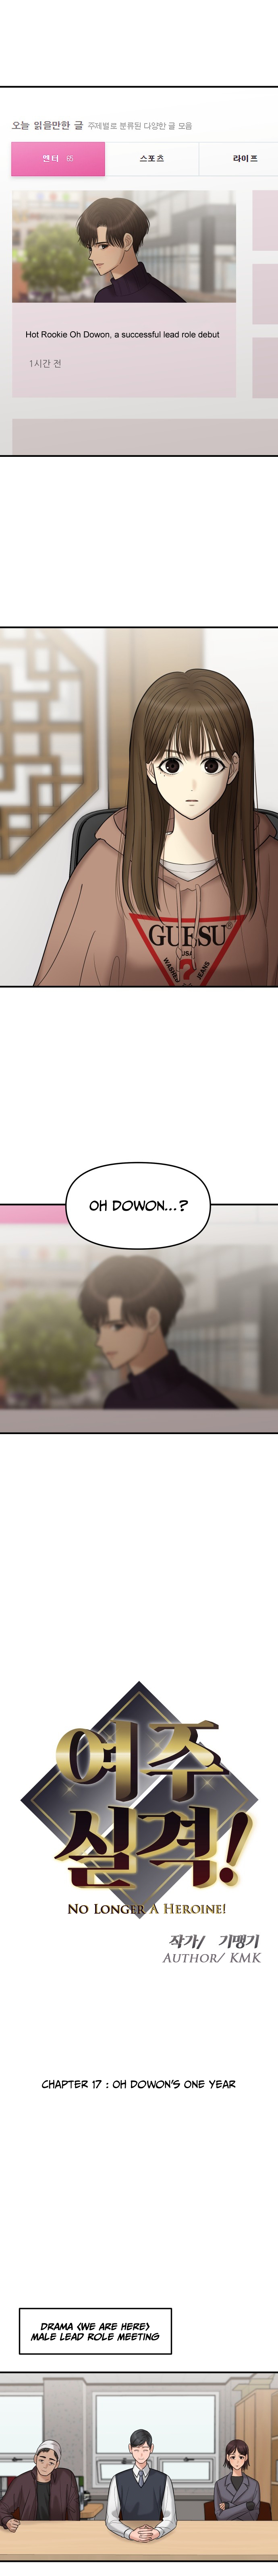 No Longer a Heroine! Ch. 17 Oh Dowon's One Year